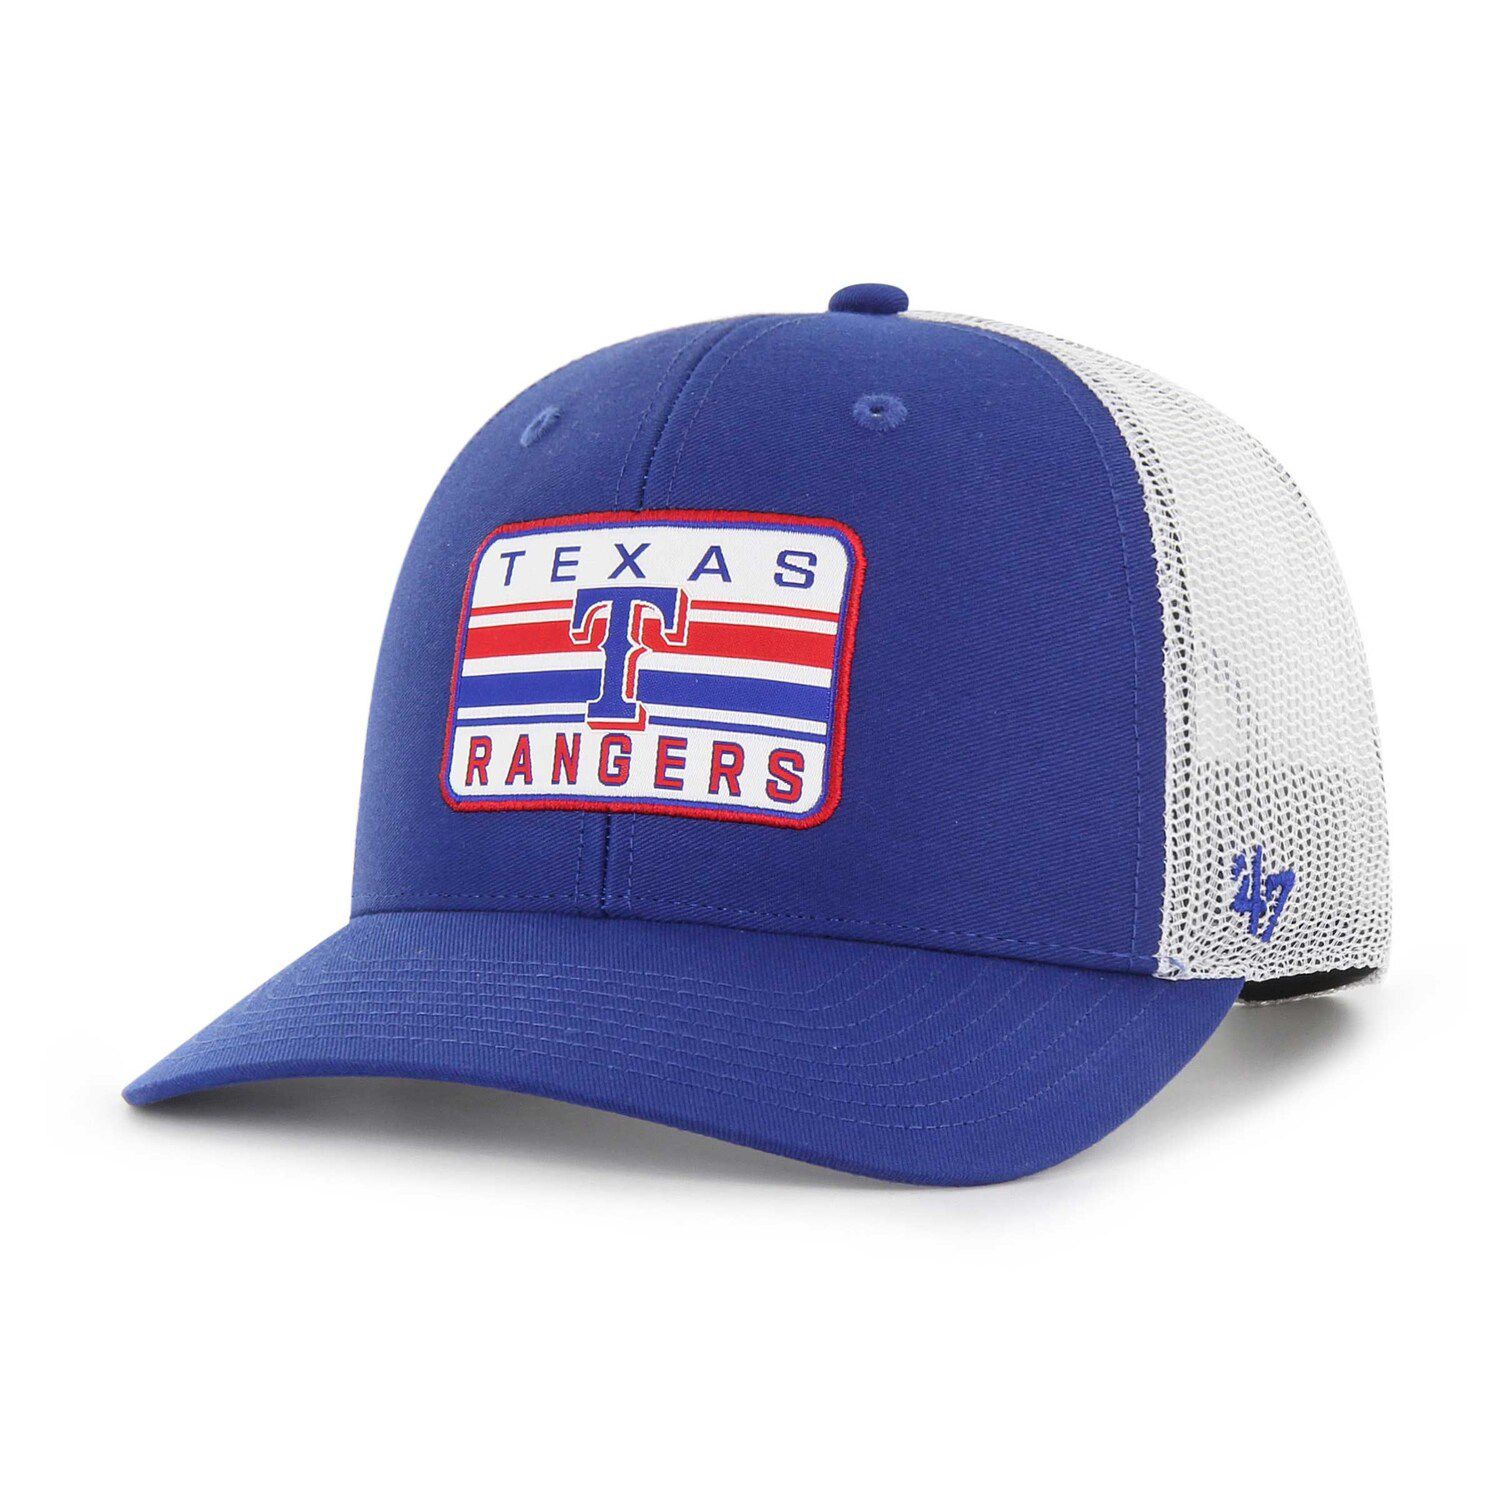 Texas Rangers Mitchell & Ness Cooperstown Collection Away Snapback Hat -  Gray